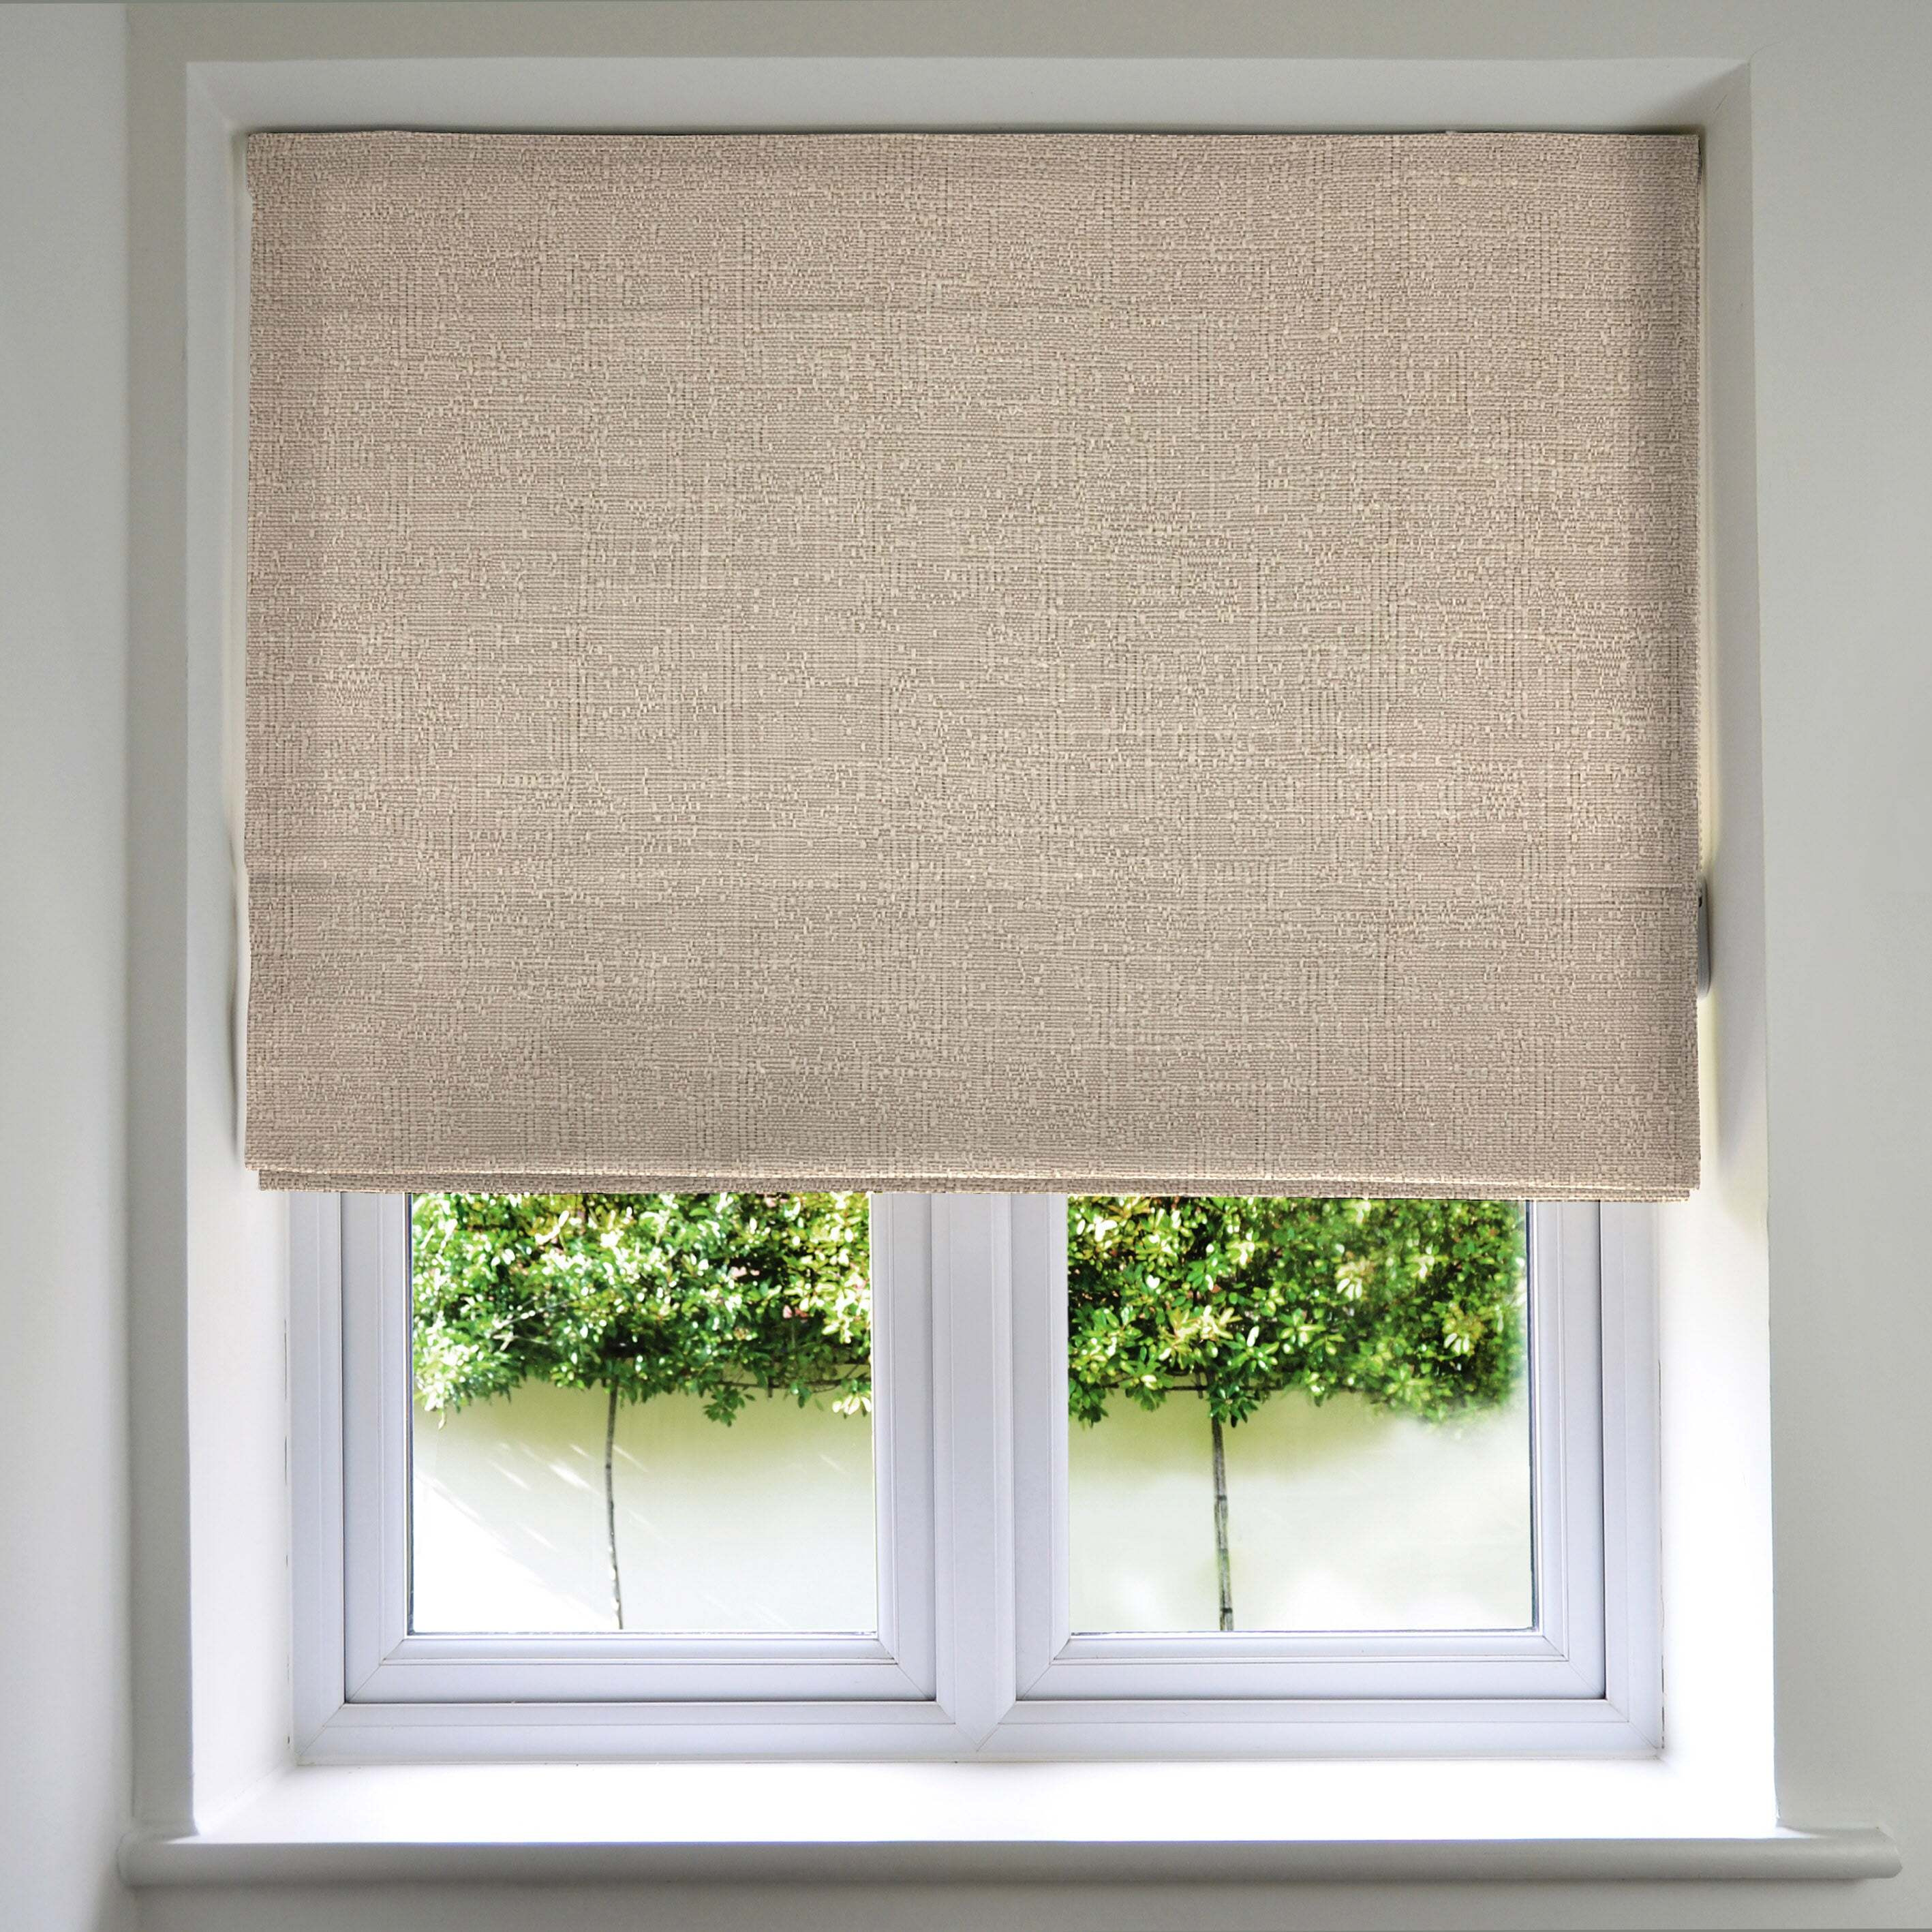 Harmony Taupe Textured Roman Blinds, Standard Lining / 265cm x 200cm / Taupe